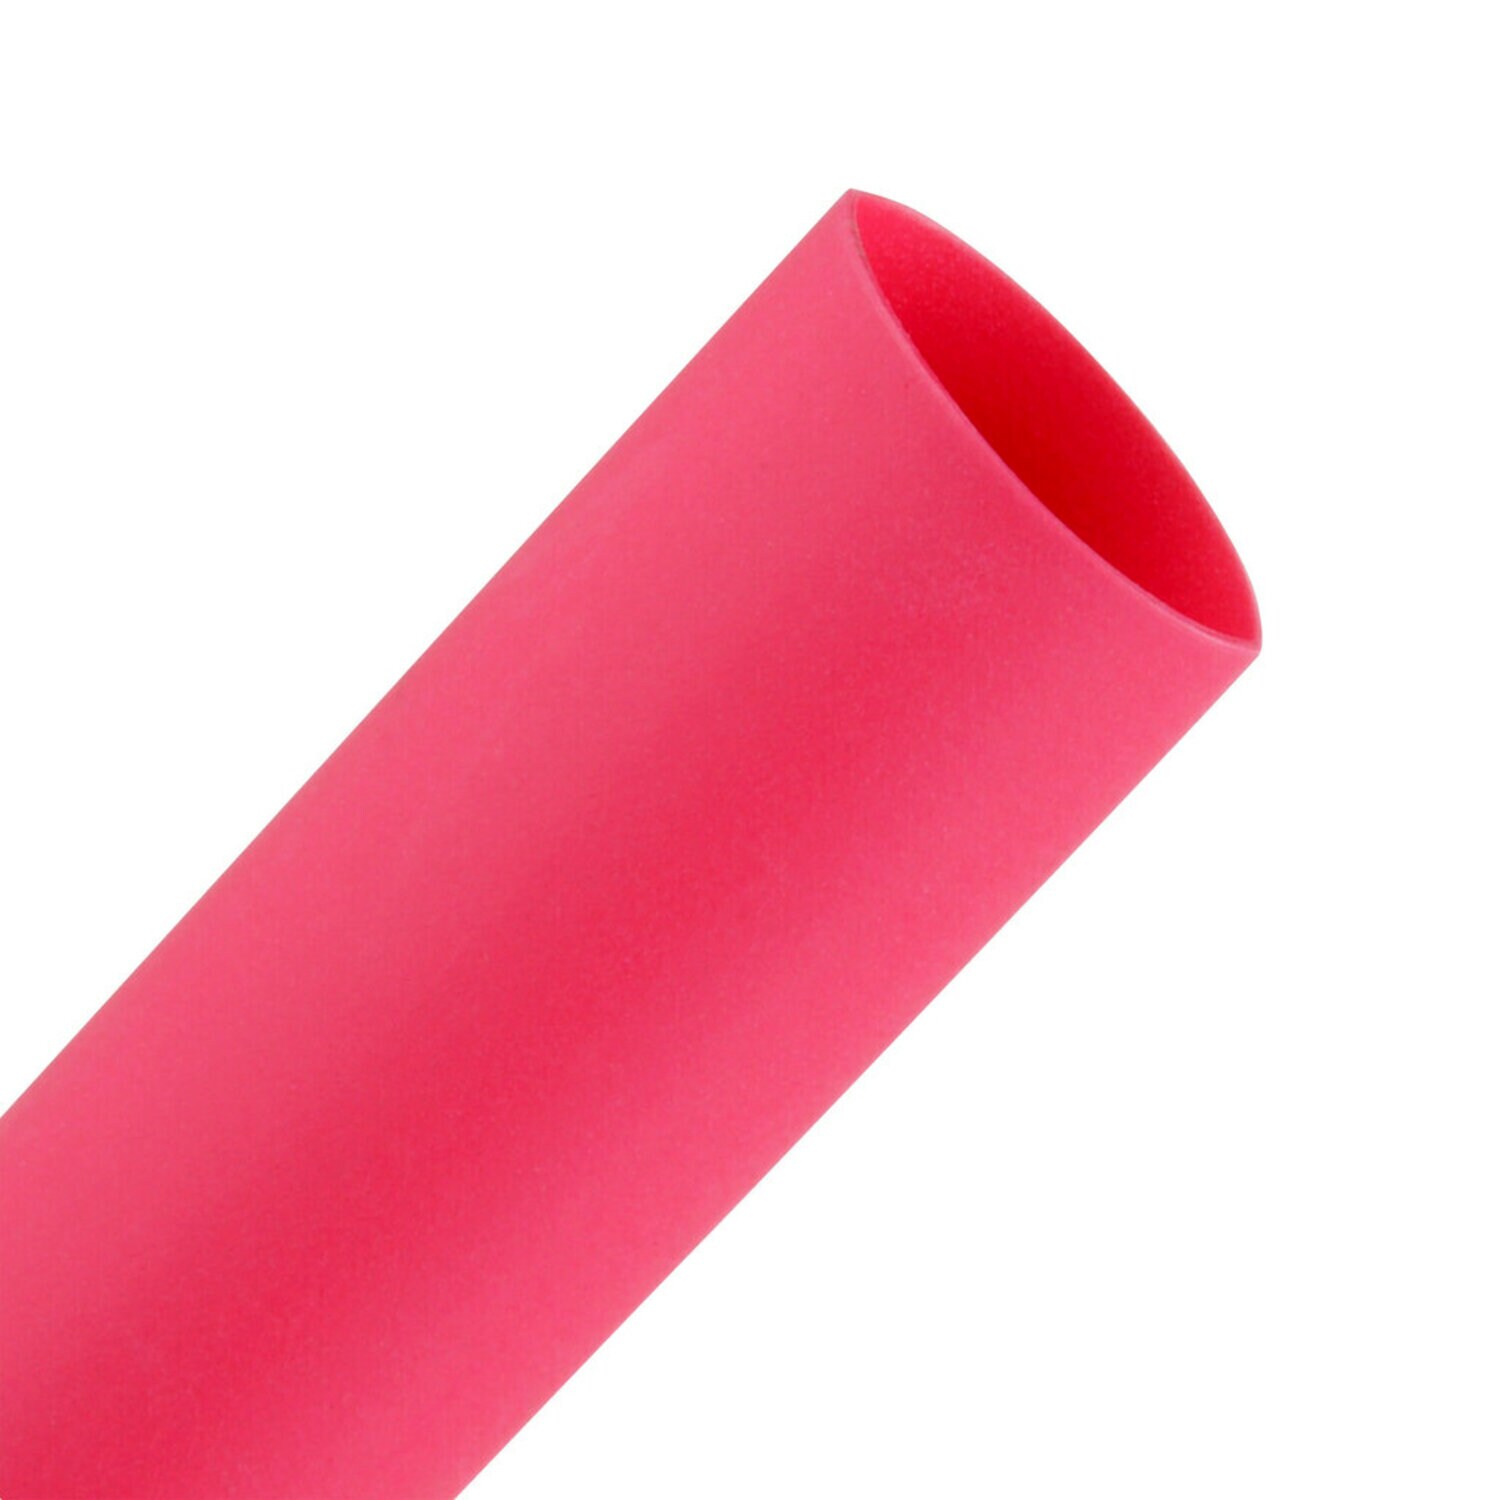 7100025161 - 3M Heat Shrink Thin-Wall Tubing FP-301-1/2-Red-200`: 200 ft spool
length, 600 ft/case